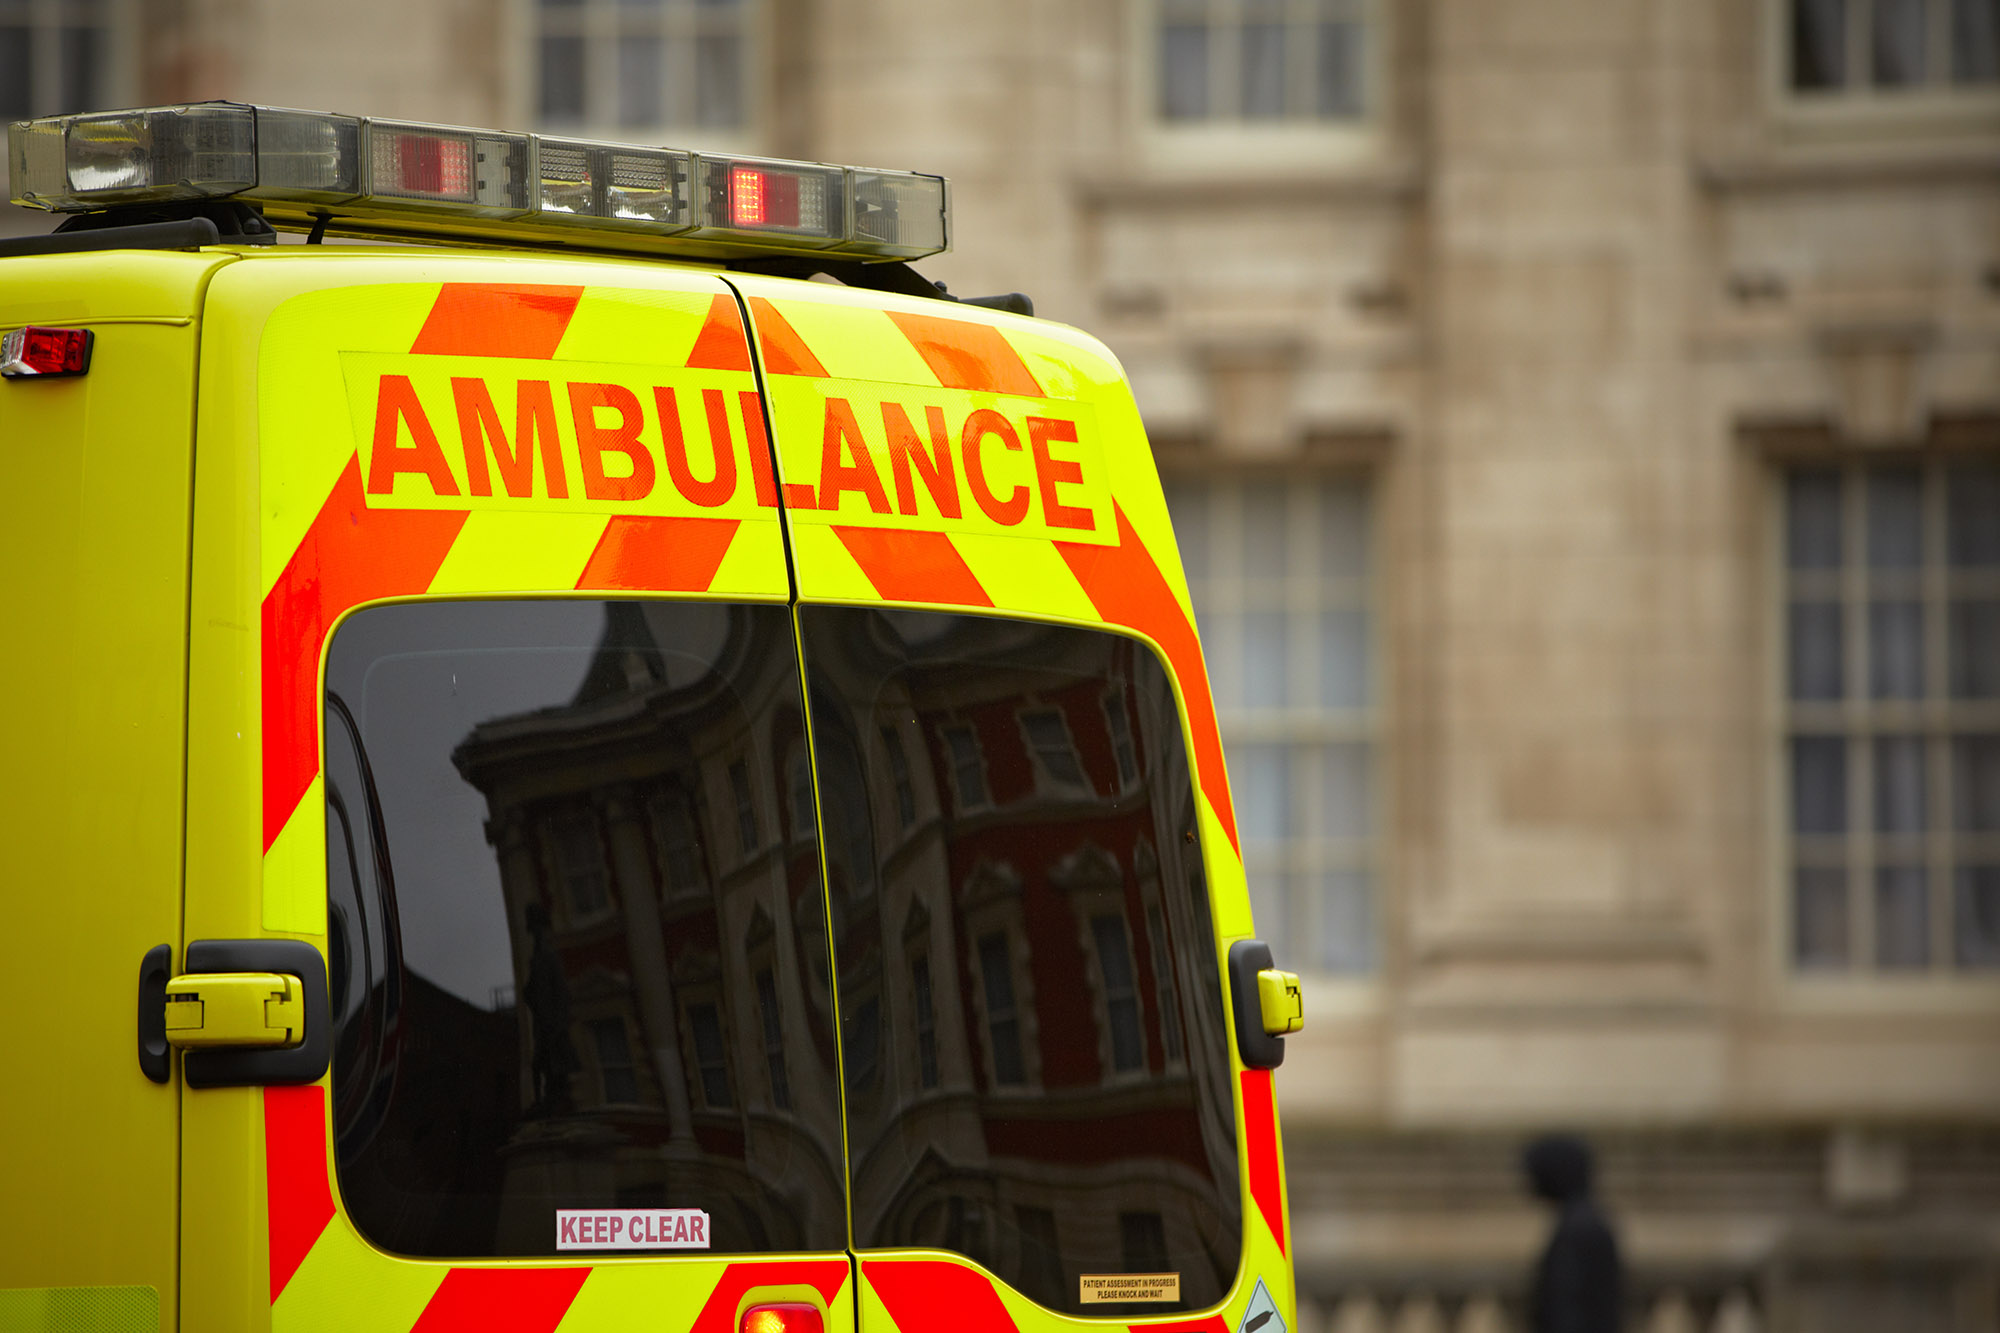 Ambulance, personal injury solicitors, accident compensation claim managers